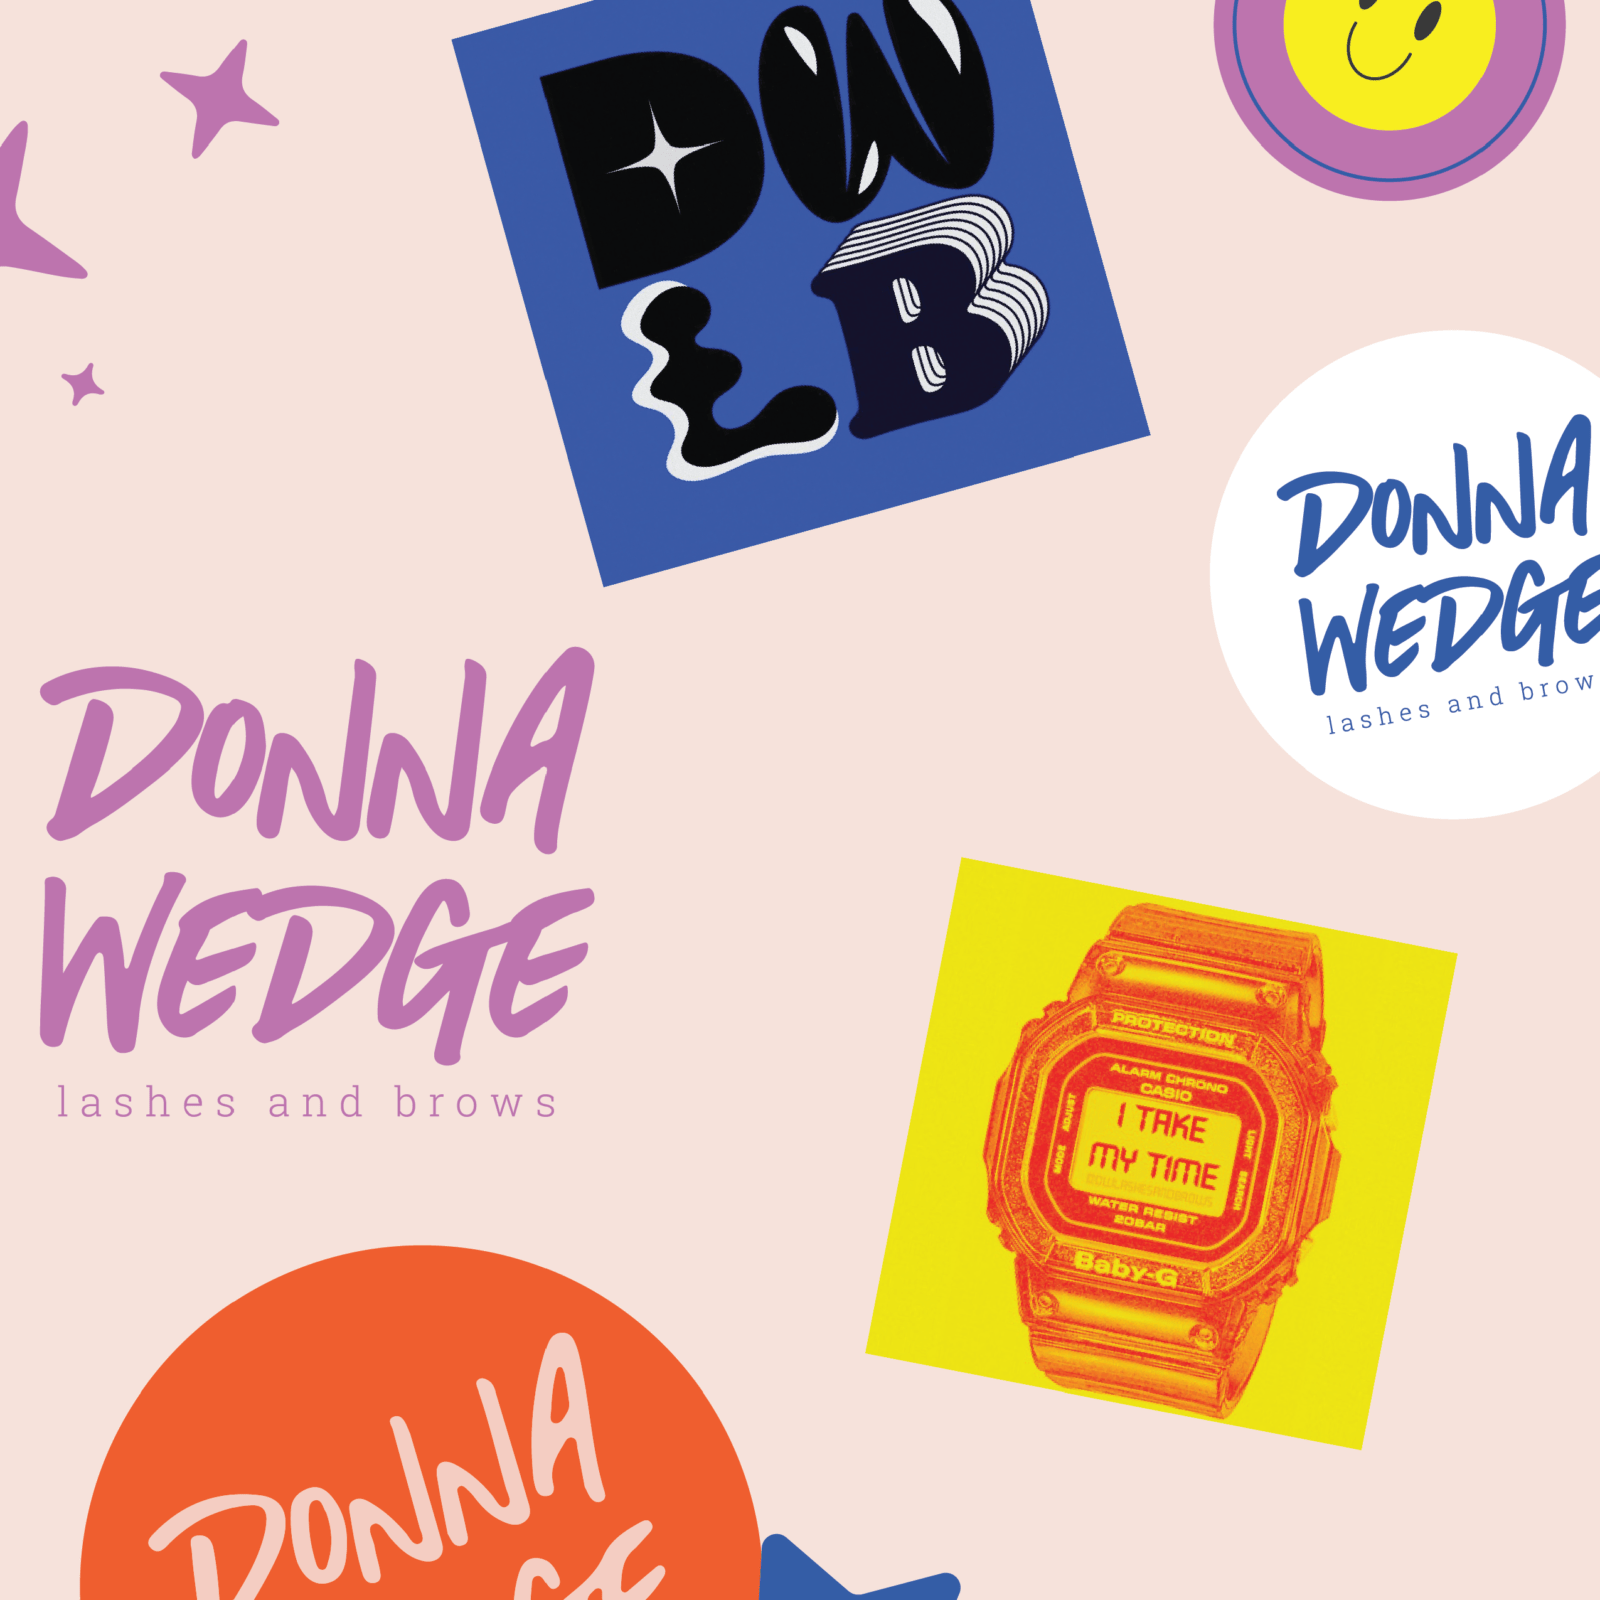 Donna Wedge - Brow Course Material